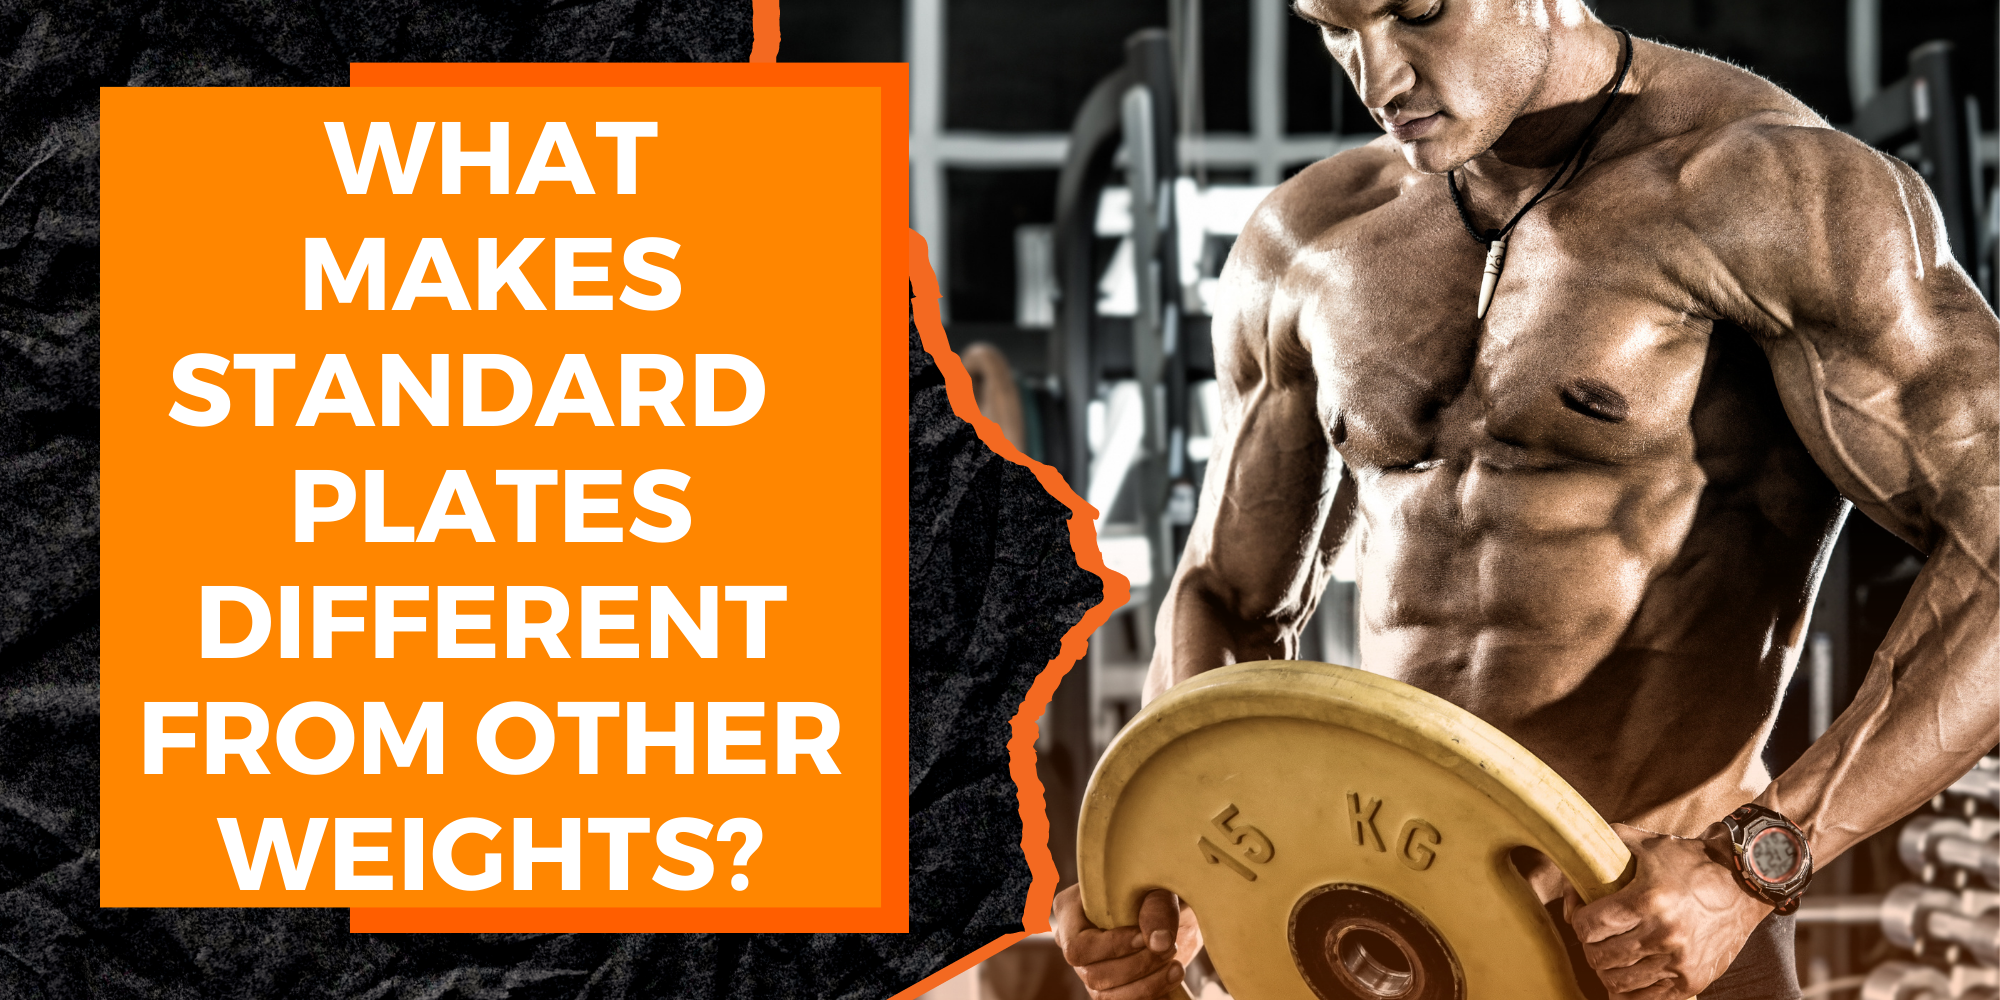 The Advantages of Standard Weight Plates over Other Weights